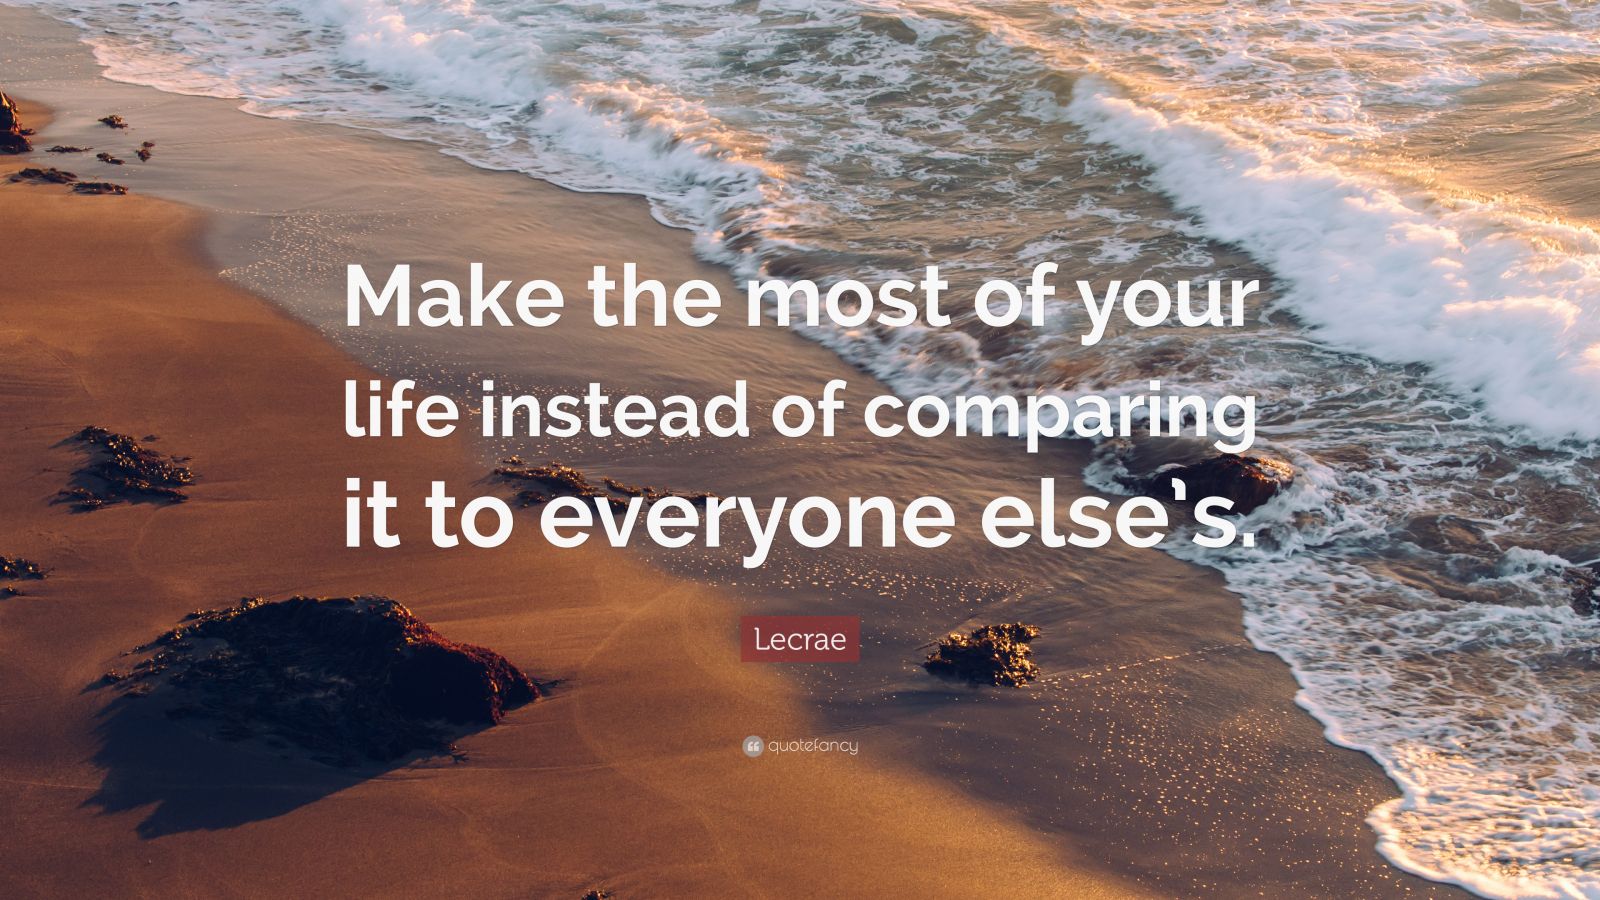 Lecrae Quote: “Make the most of your life instead of comparing it to